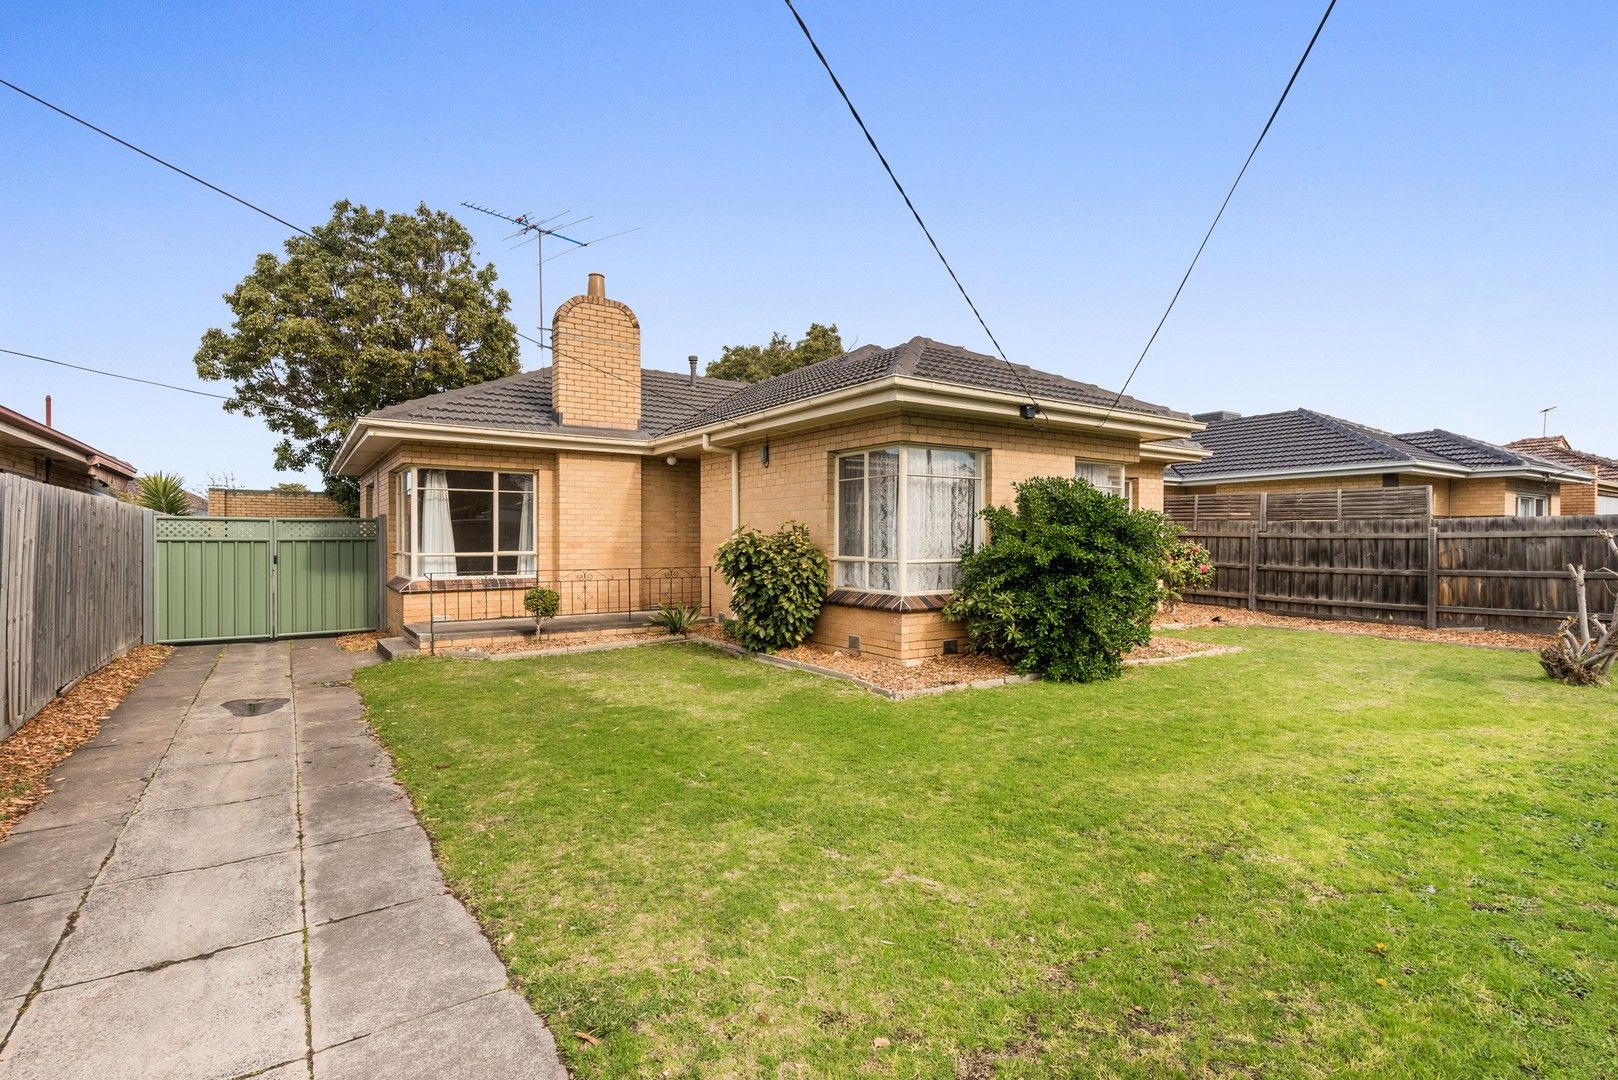 3 bedrooms House in 790 Centre Road BENTLEIGH EAST VIC, 3165